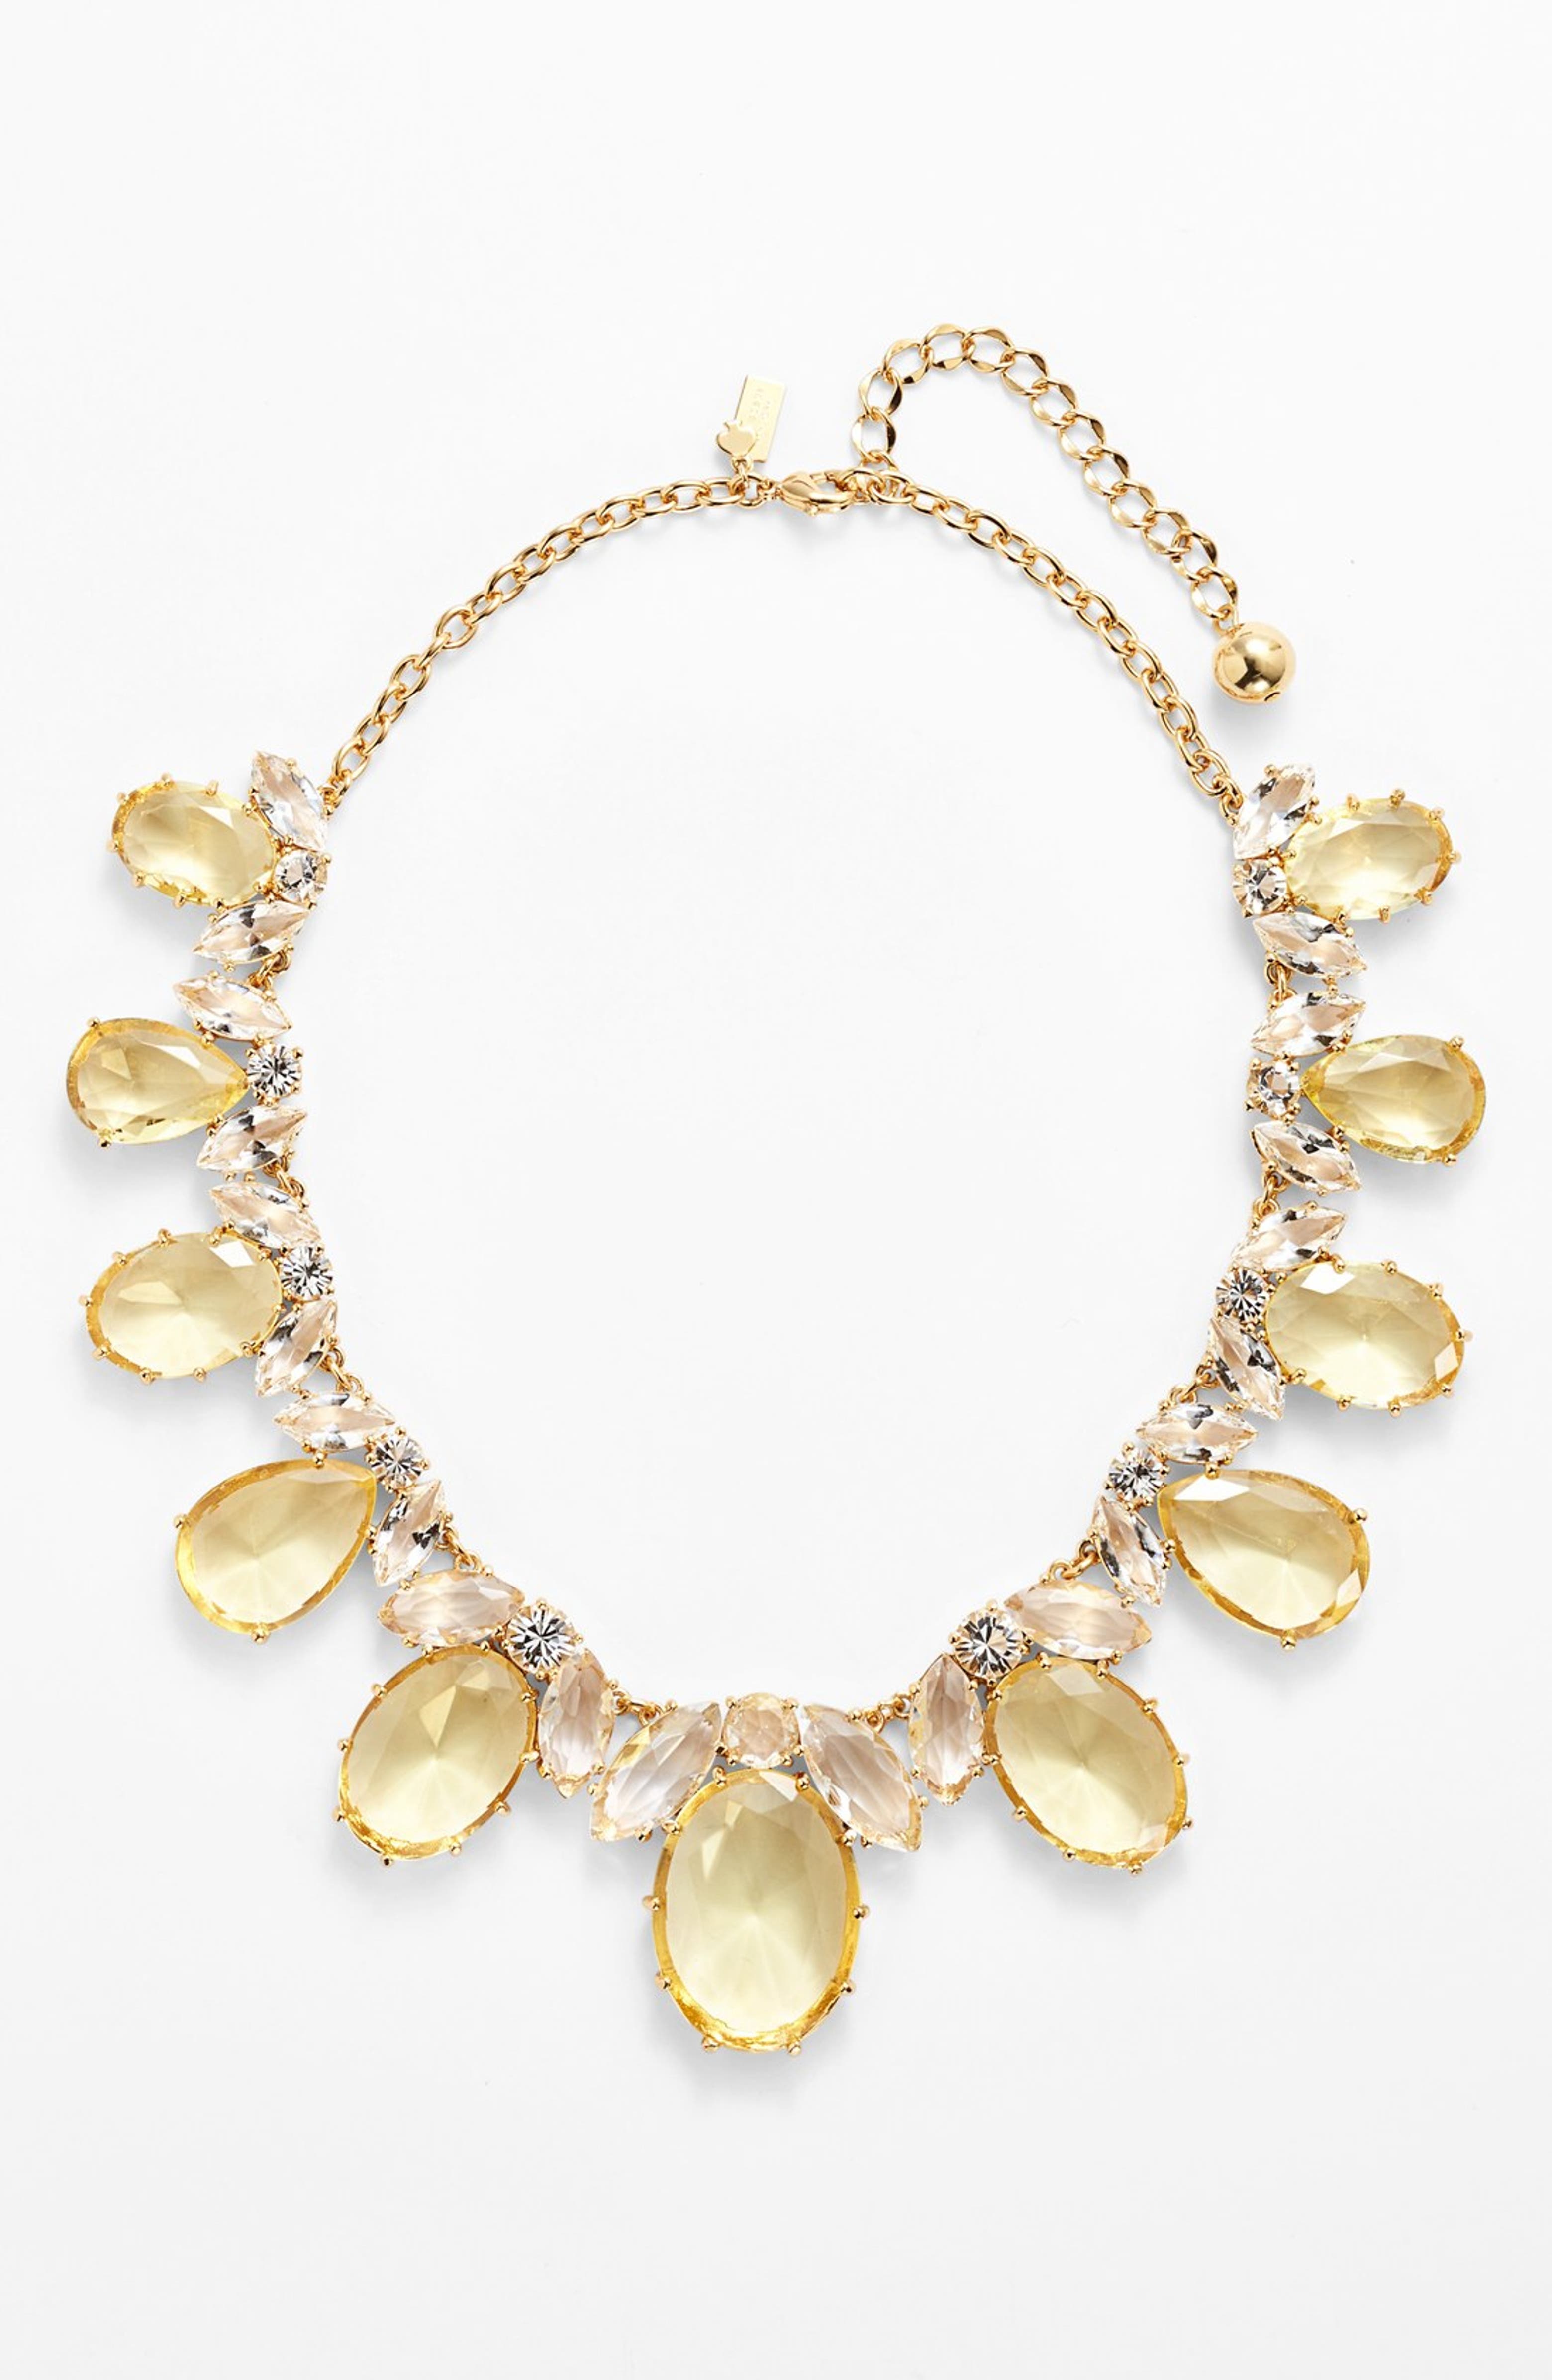 kate spade new york 'up the ante' stone statement necklace Nordstrom